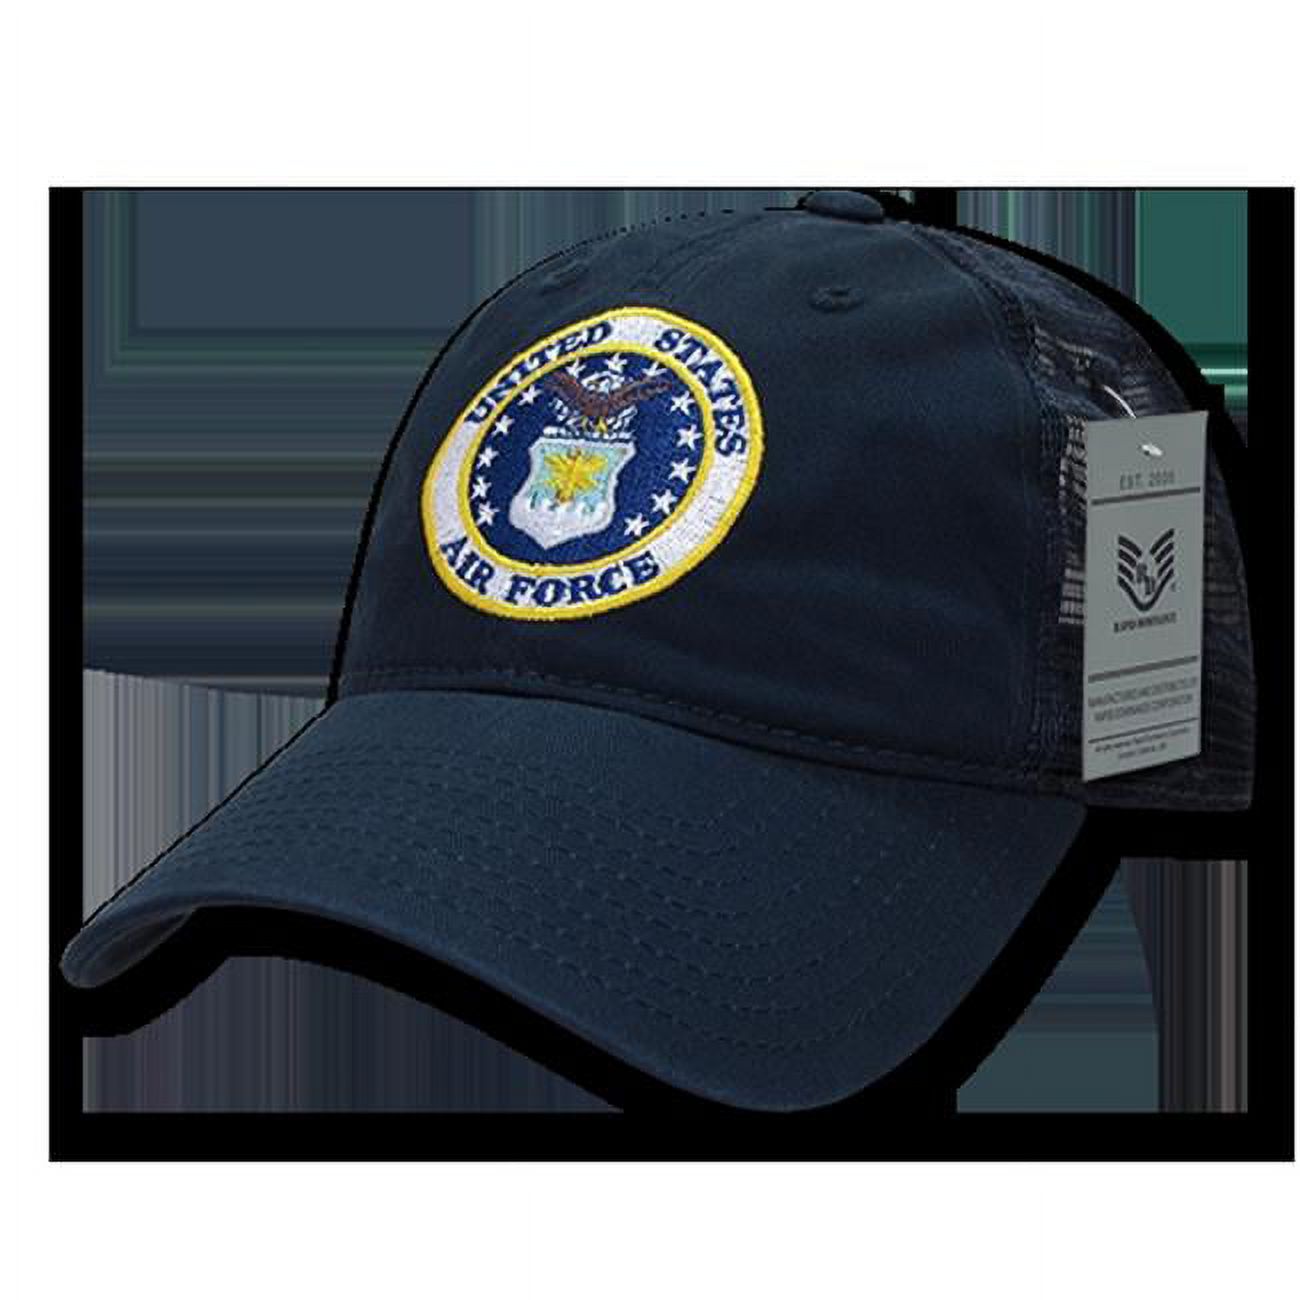 Rapid Dominance Air Force Round Logo Relaxed Trucker Mens Cap [Navy Blue - Adjustable] - image 1 of 3